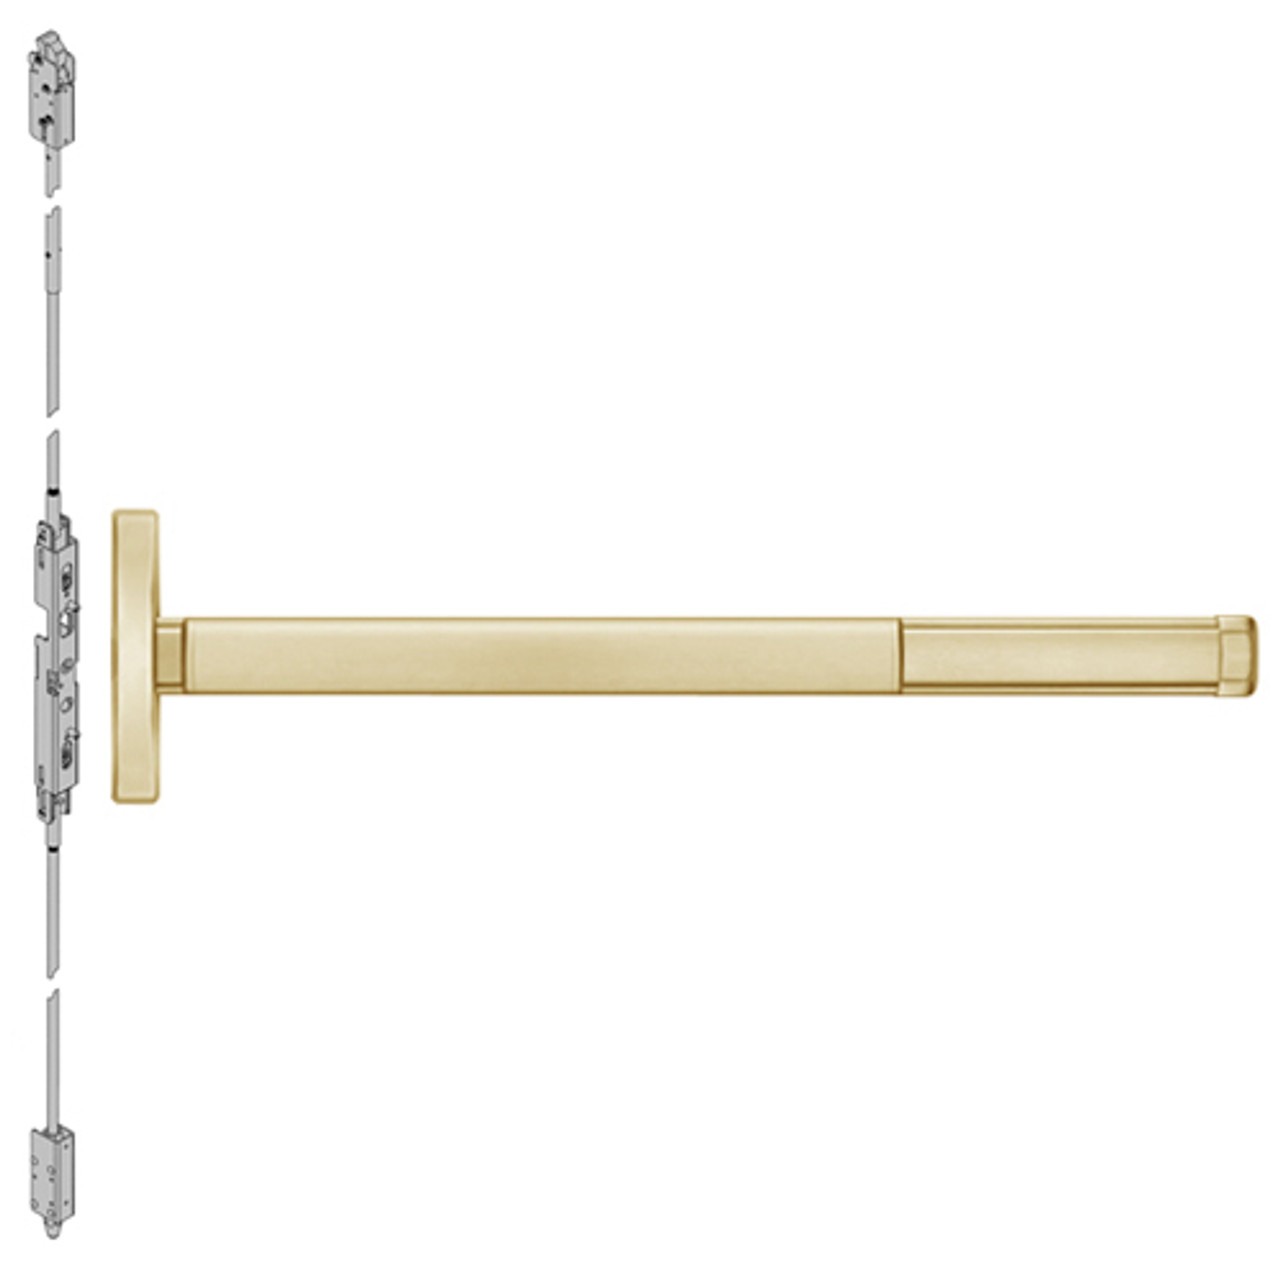 ELR2602-606-36 PHI 2600 Series Concealed Vertical Rod Exit Device with Electric Latch Retraction Prepped for Dummy Trim in Satin Brass Finish